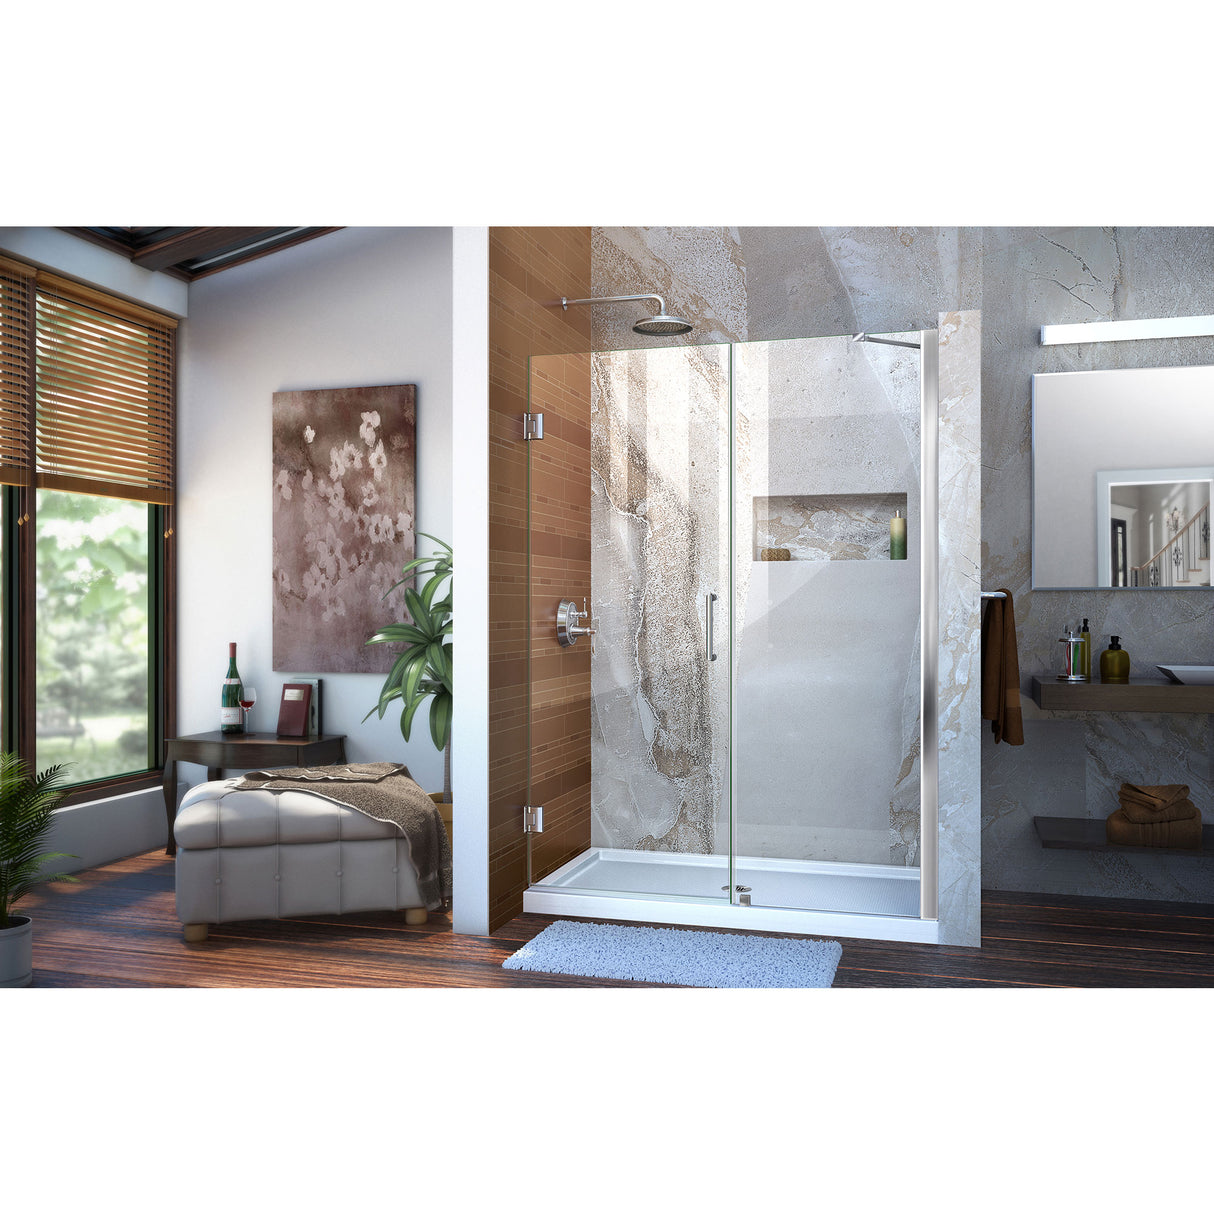 DreamLine Unidoor 54-55 in. W x 72 in. H Frameless Hinged Shower Door with Support Arm in Chrome